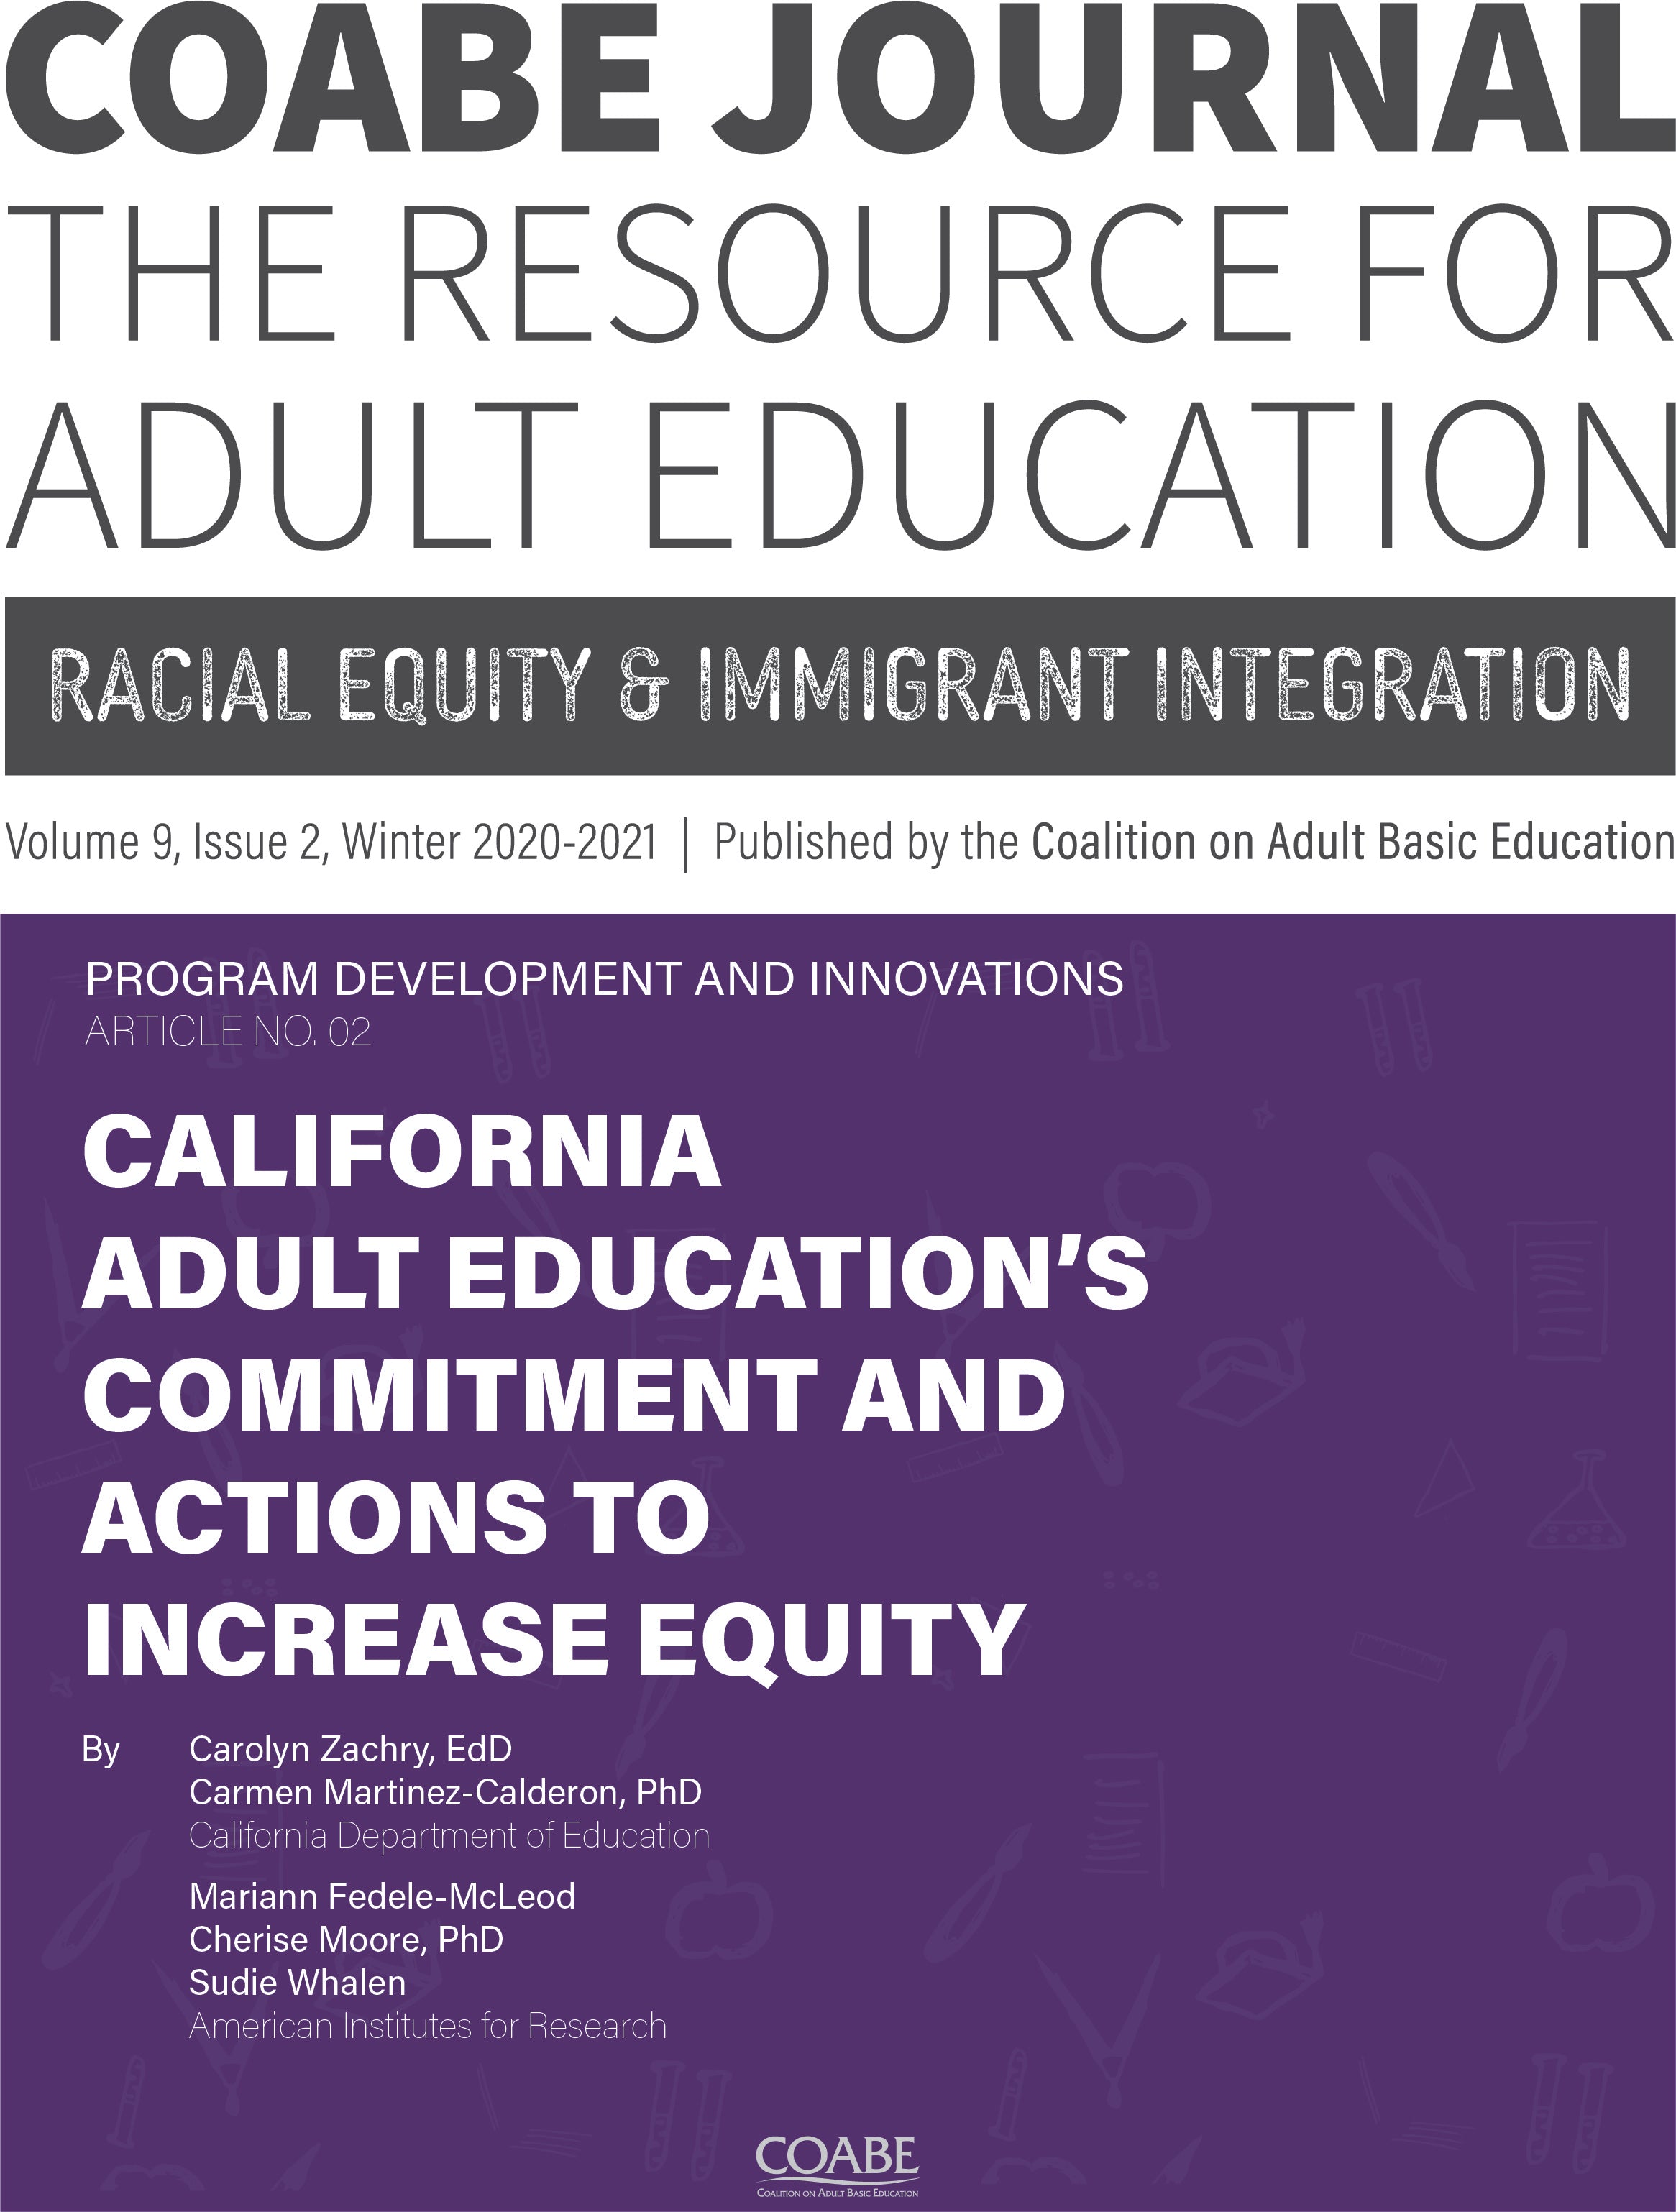 Article 02 / California Adult Education's Commitment and Actions to Increase Equity